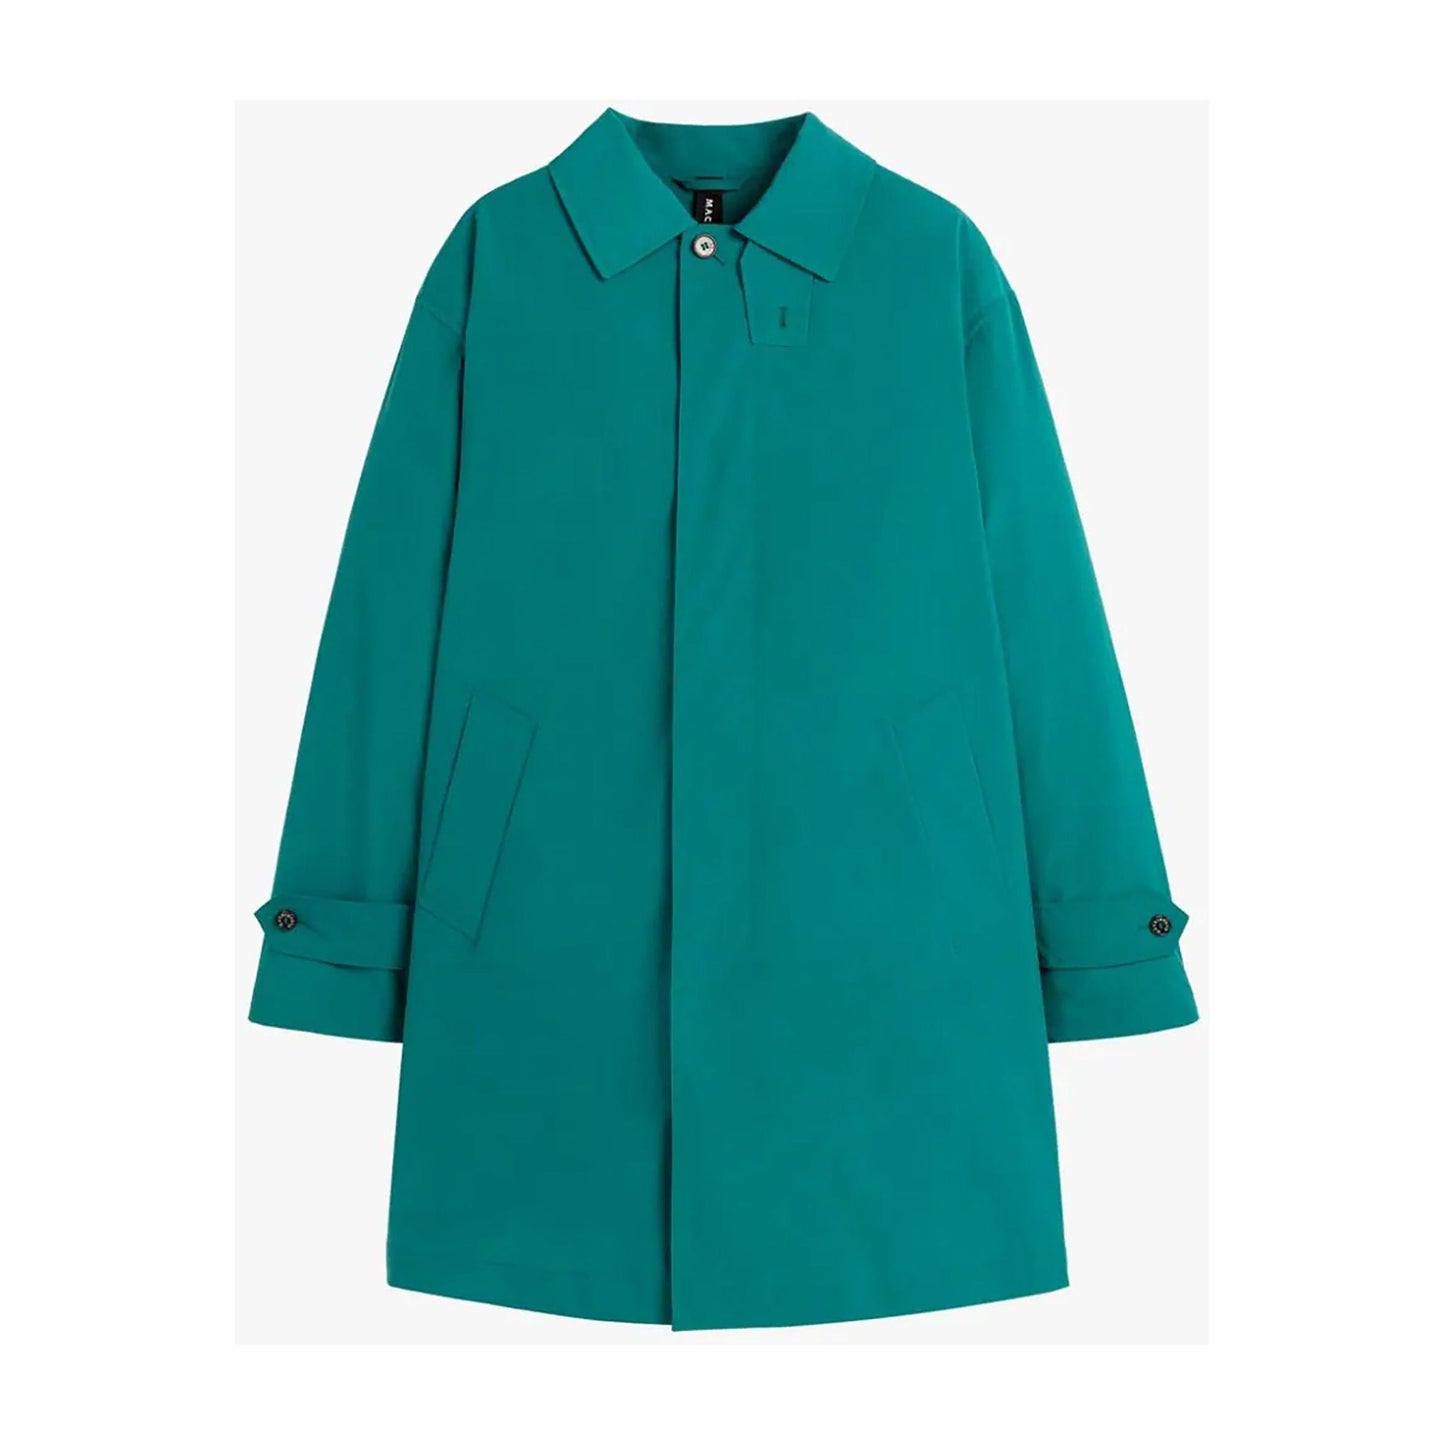 A teal, long-sleeve, button-up M Soho Coat, Teal with a collar and flap pockets on the front. This Mackintosh coat is water-repellent, making it perfect for unpredictable weather.